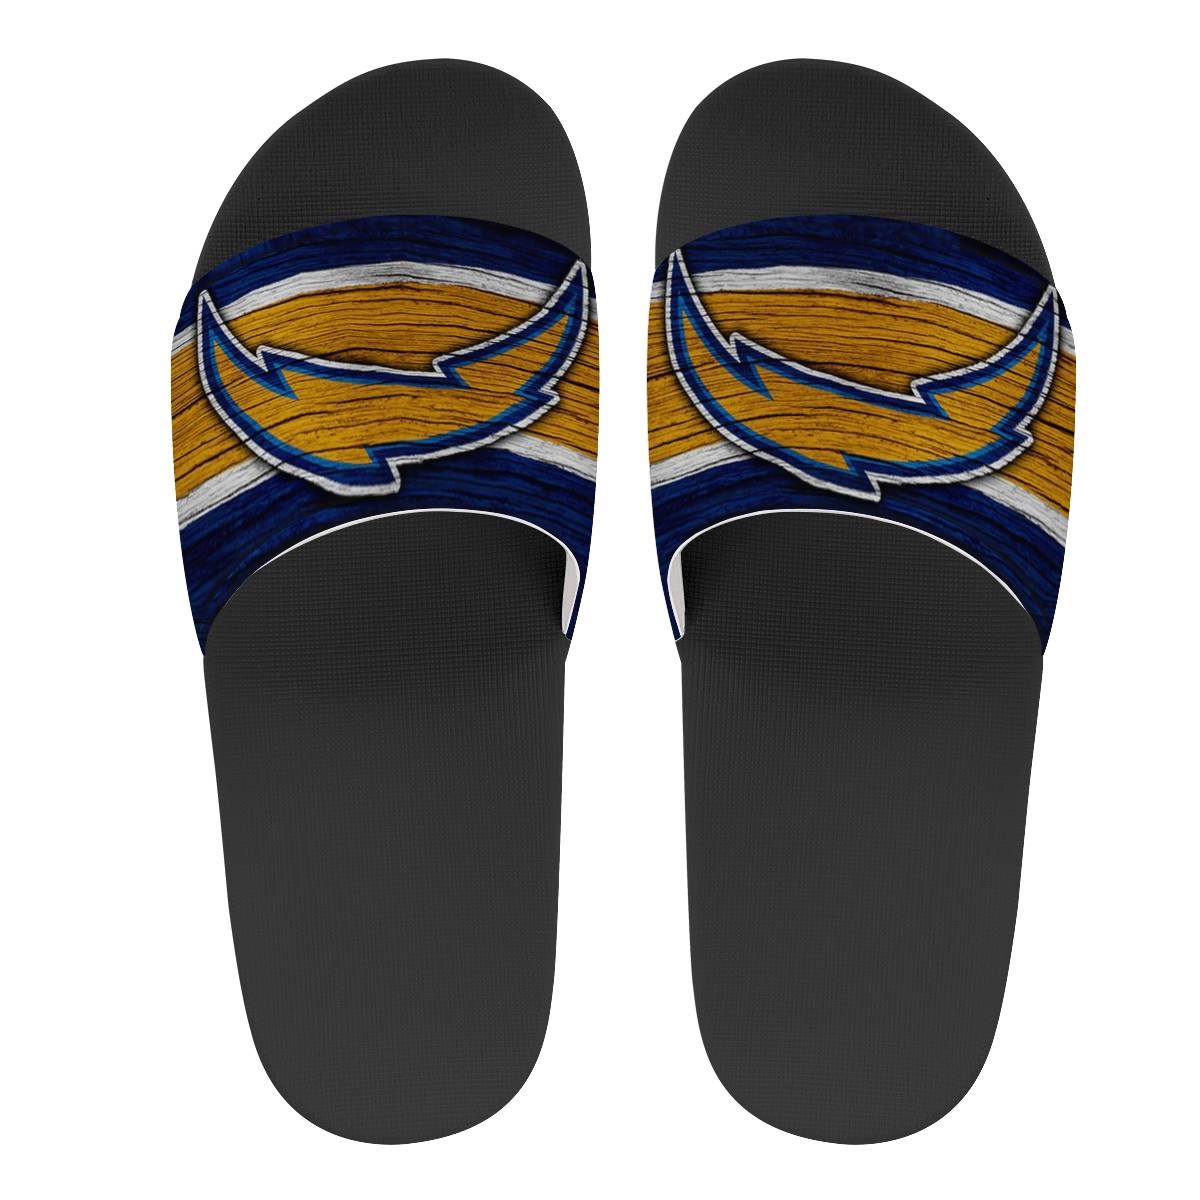 Youth Los Angeles Chargers Flip Flops 002